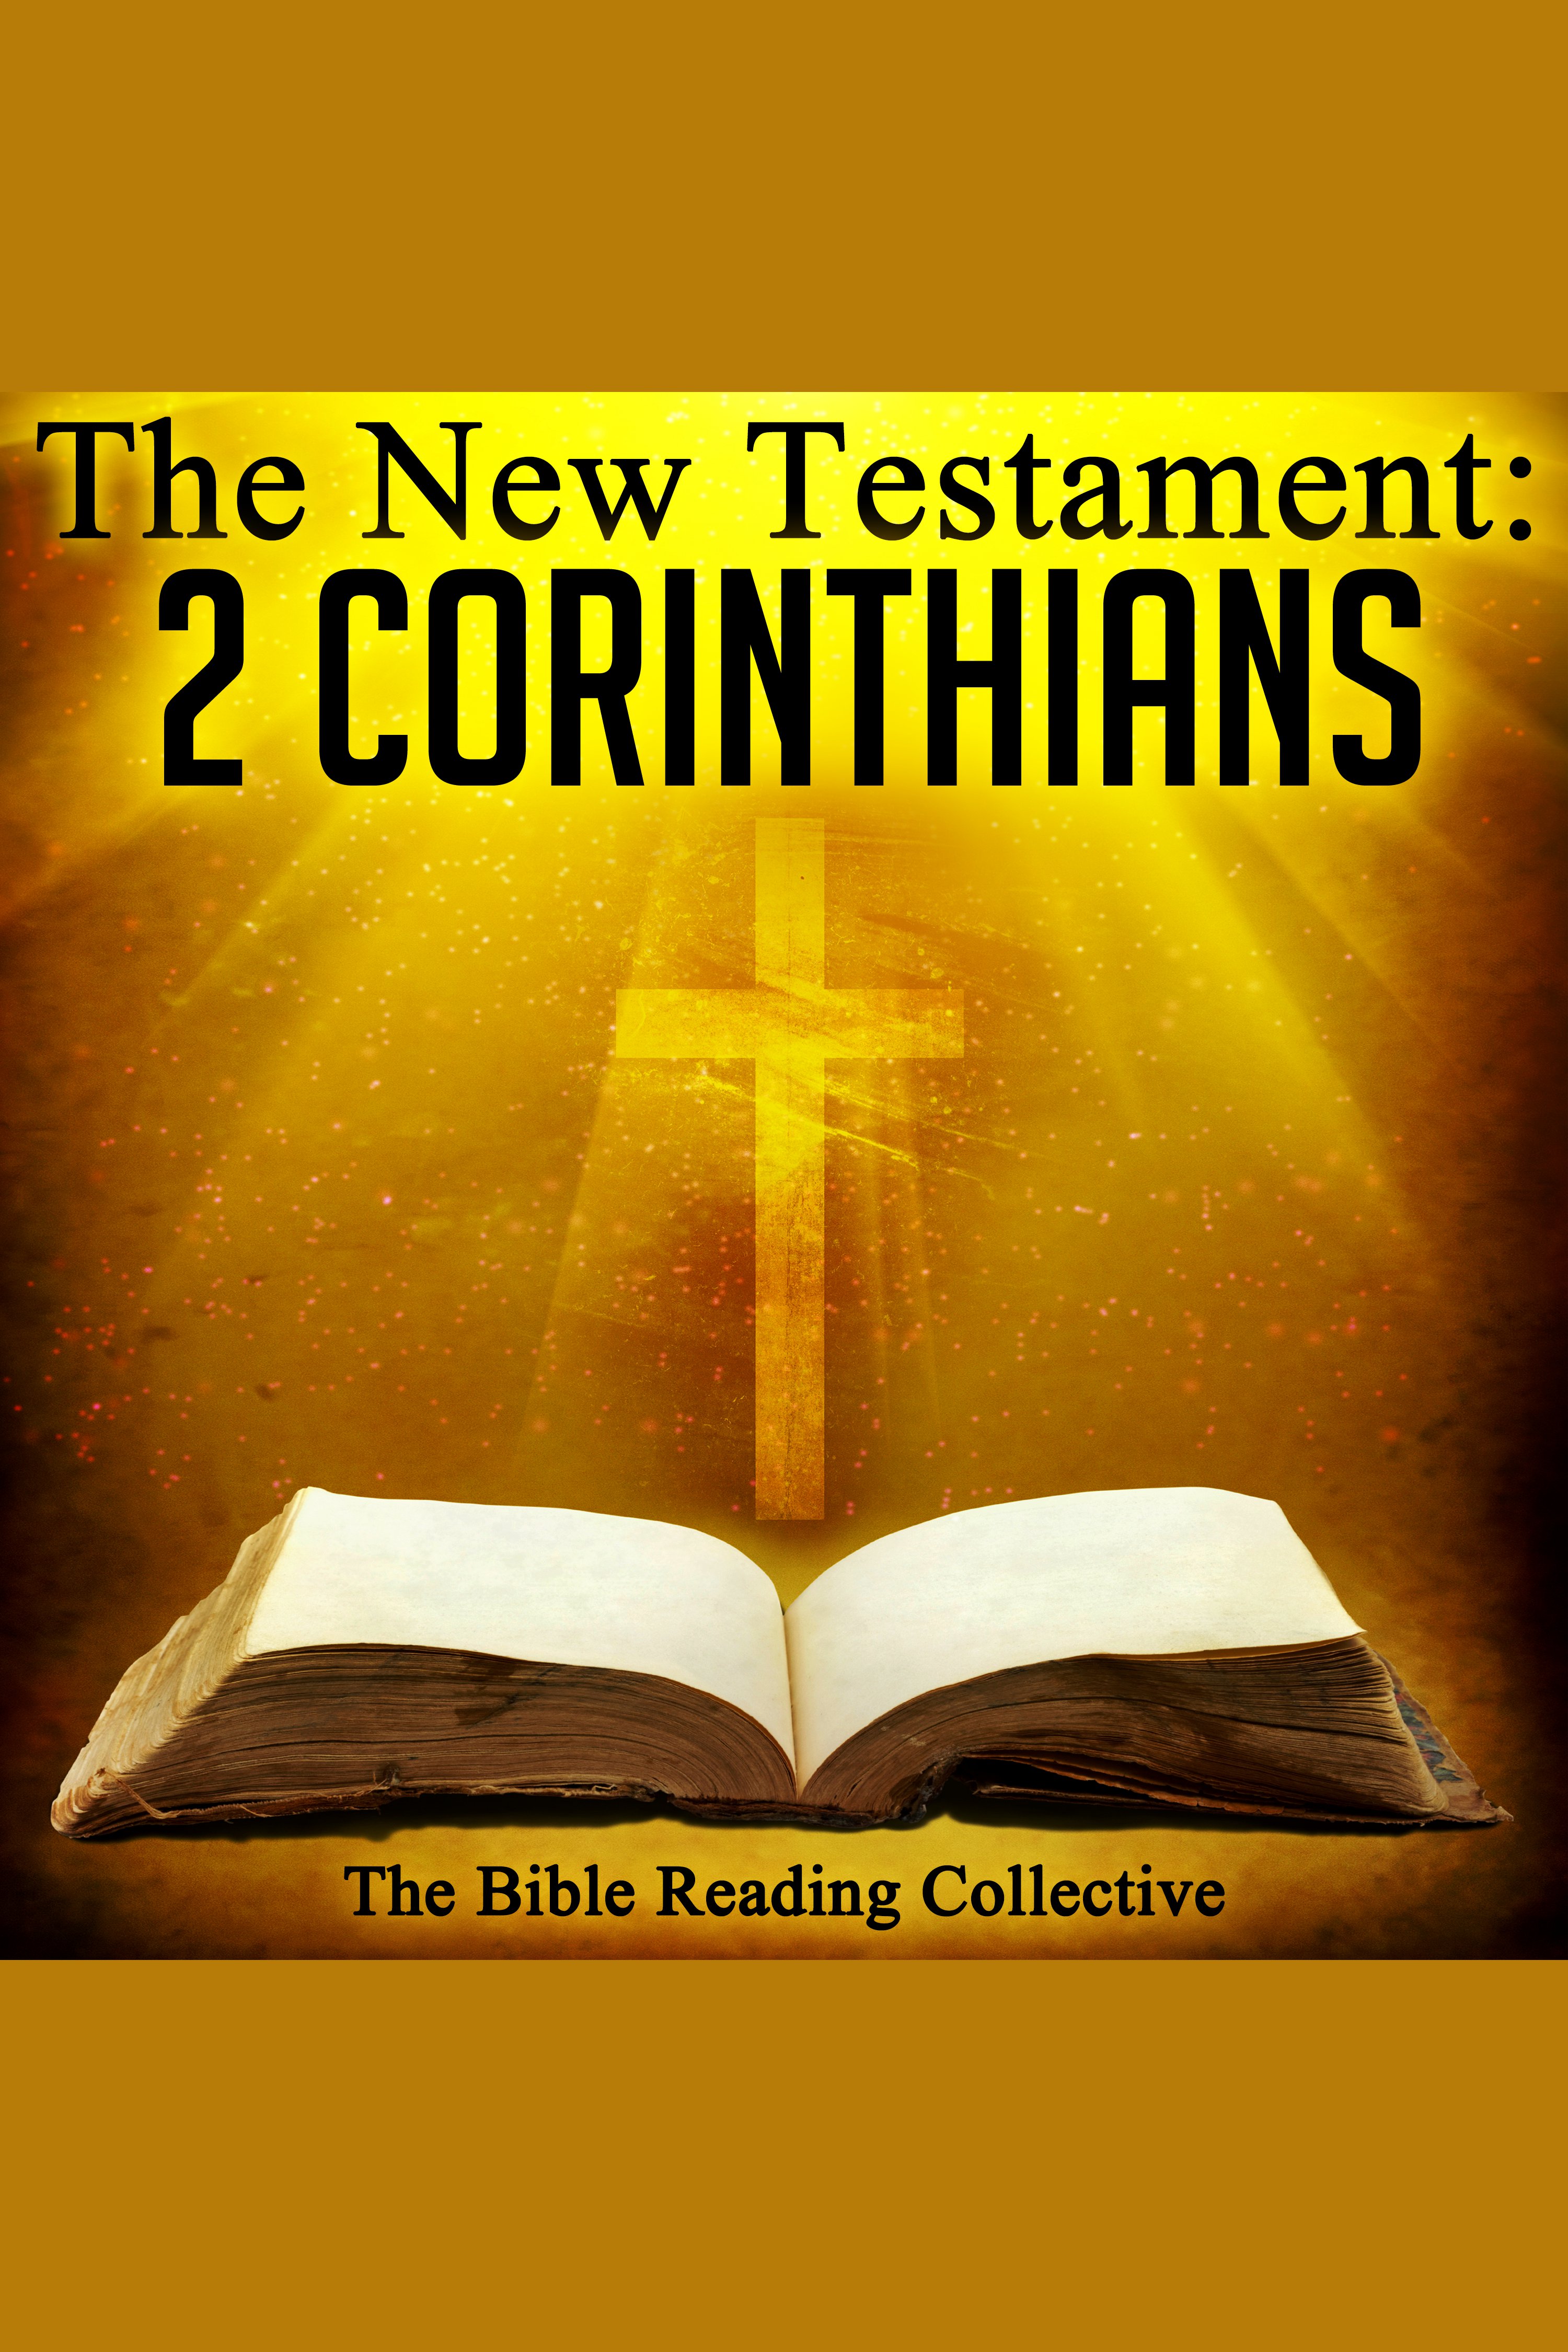 The New Testament: 2 Corinthians cover image